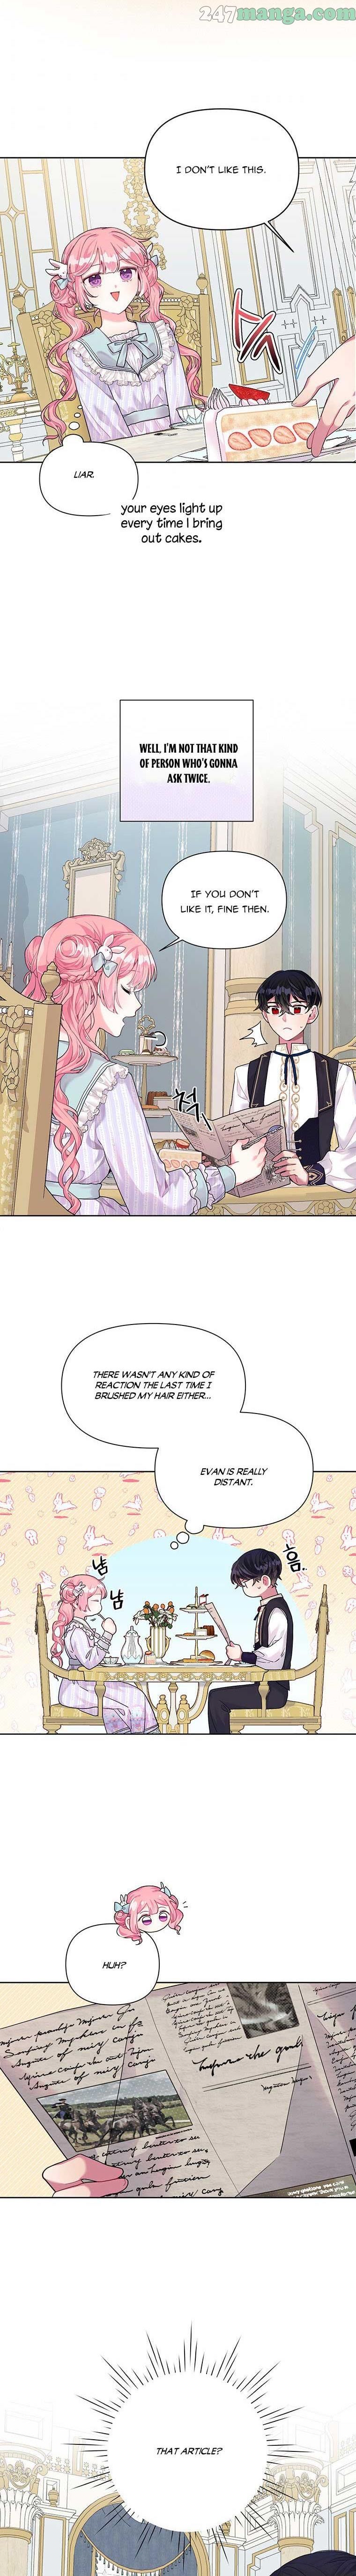 The Archvillain's Daughter In Law - Page 2